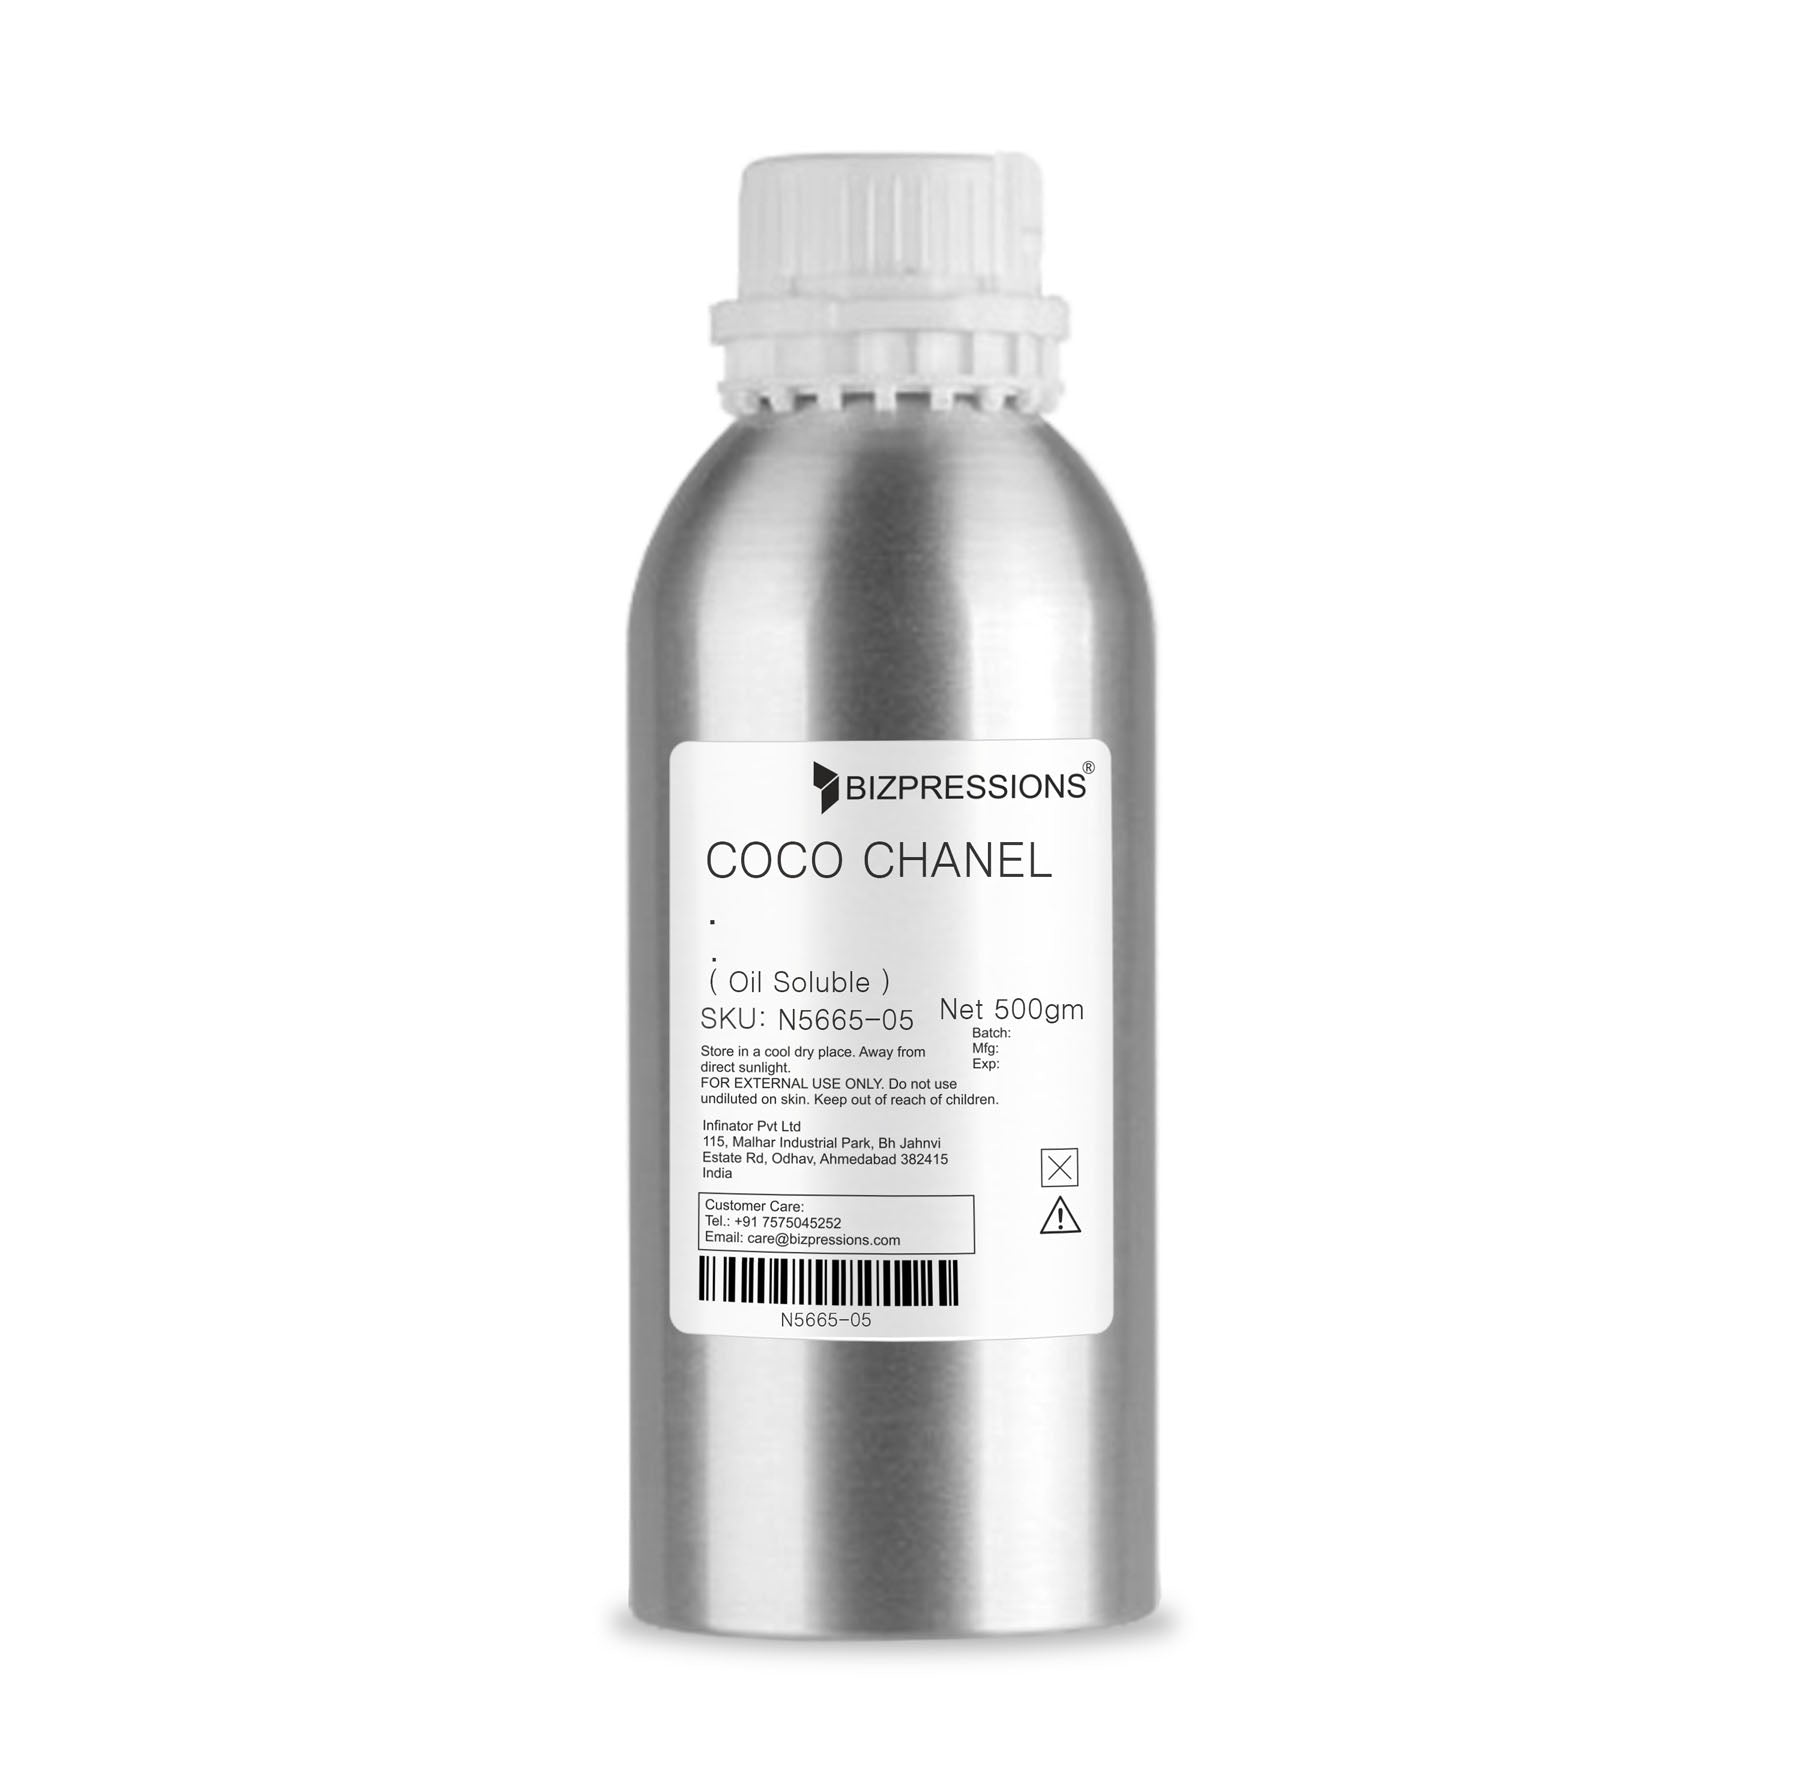 COCO CHANEL - Fragrance ( Oil Soluble ) - 500 gm